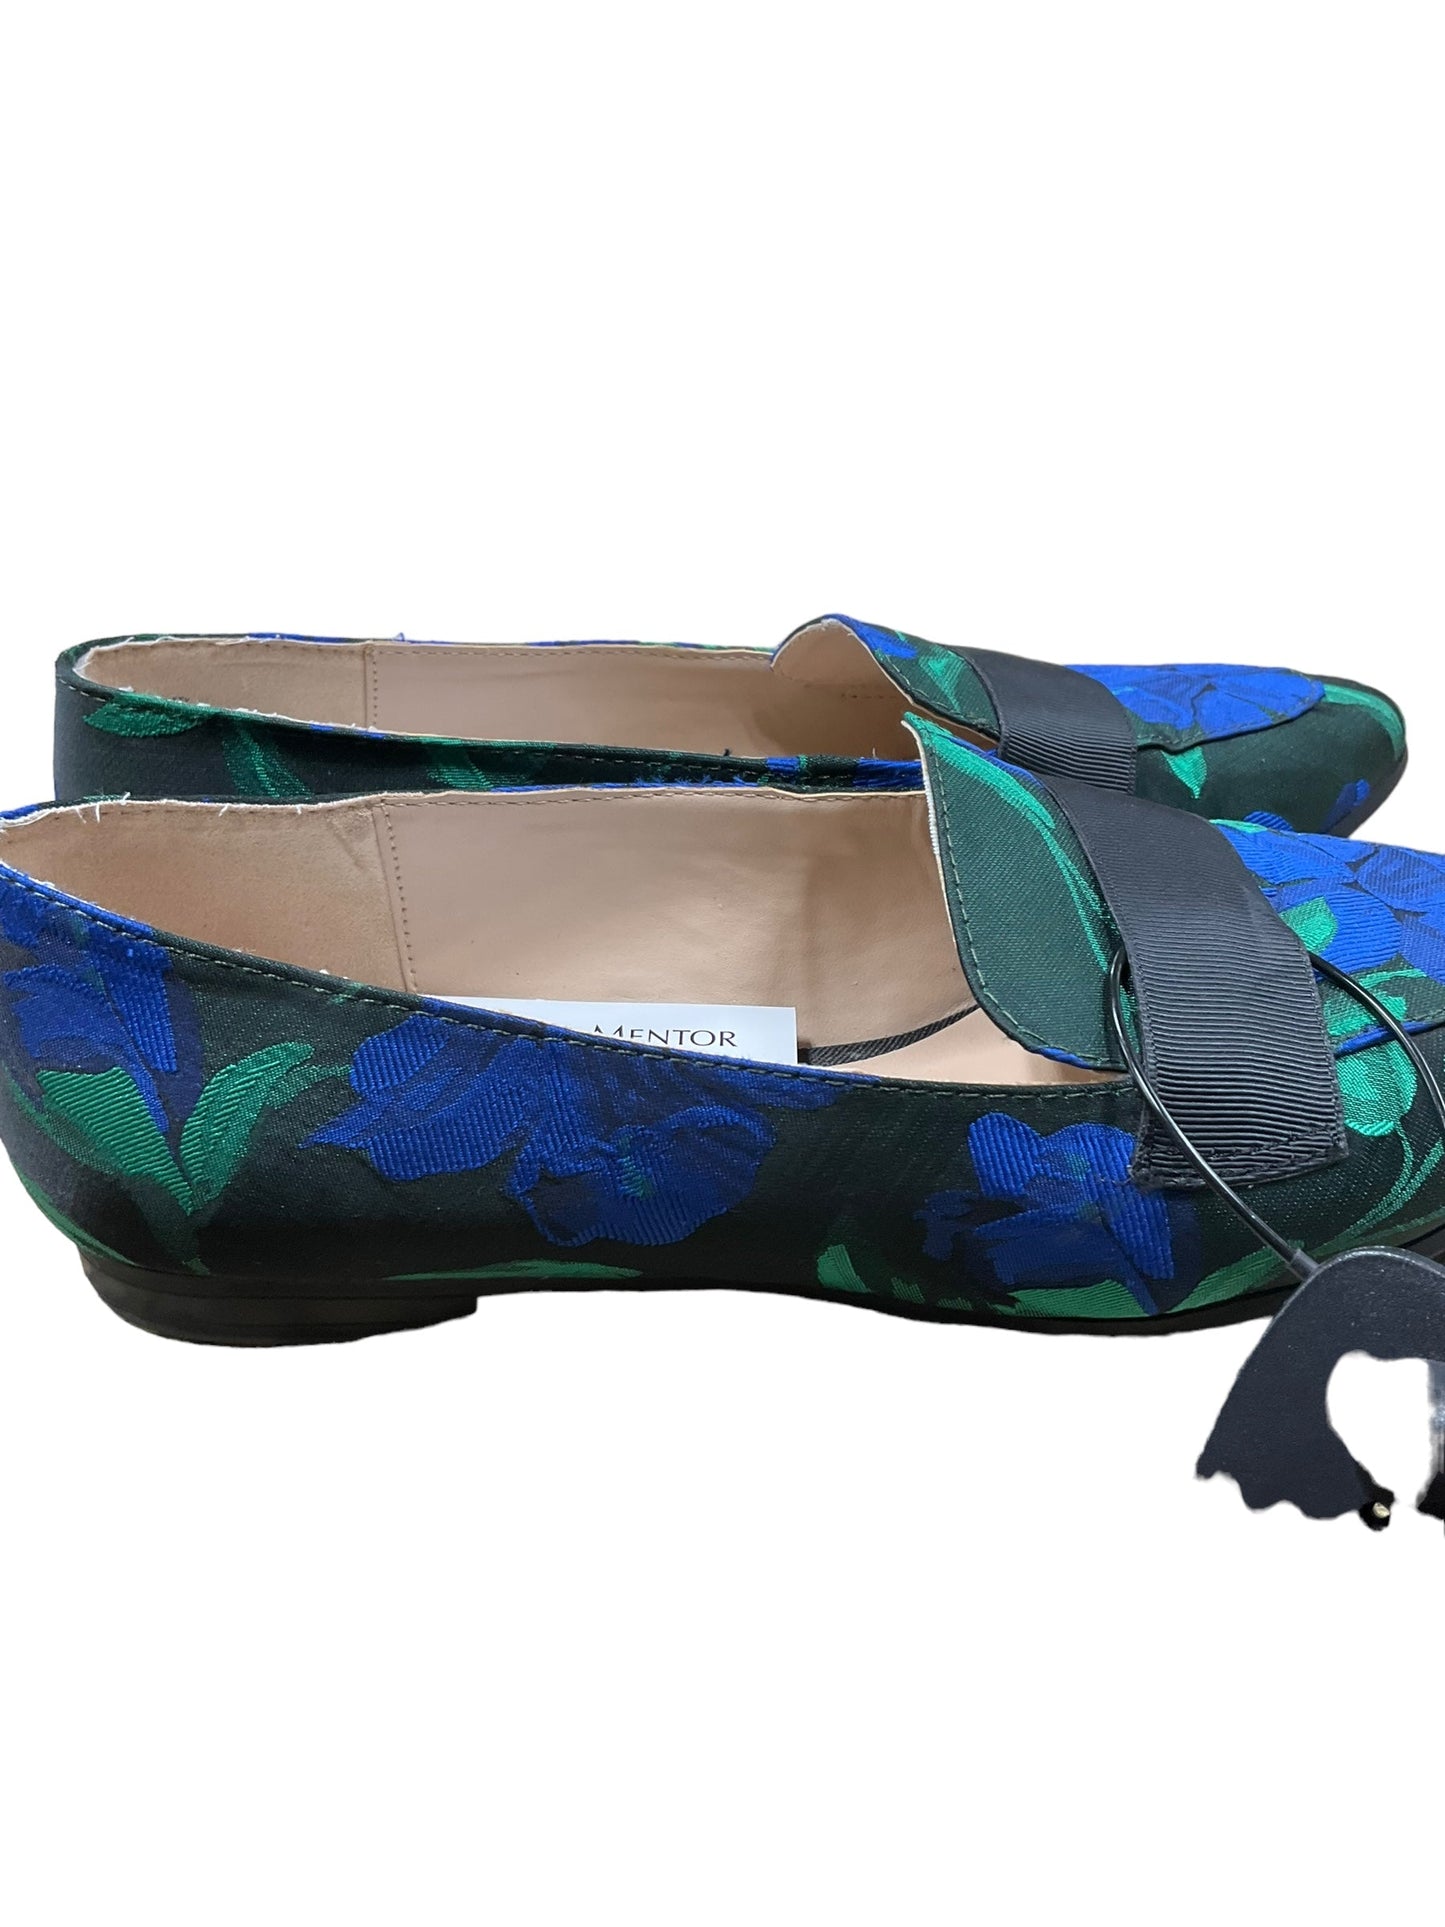 Blue & Green Shoes Flats Kelly And Katie, Size 7